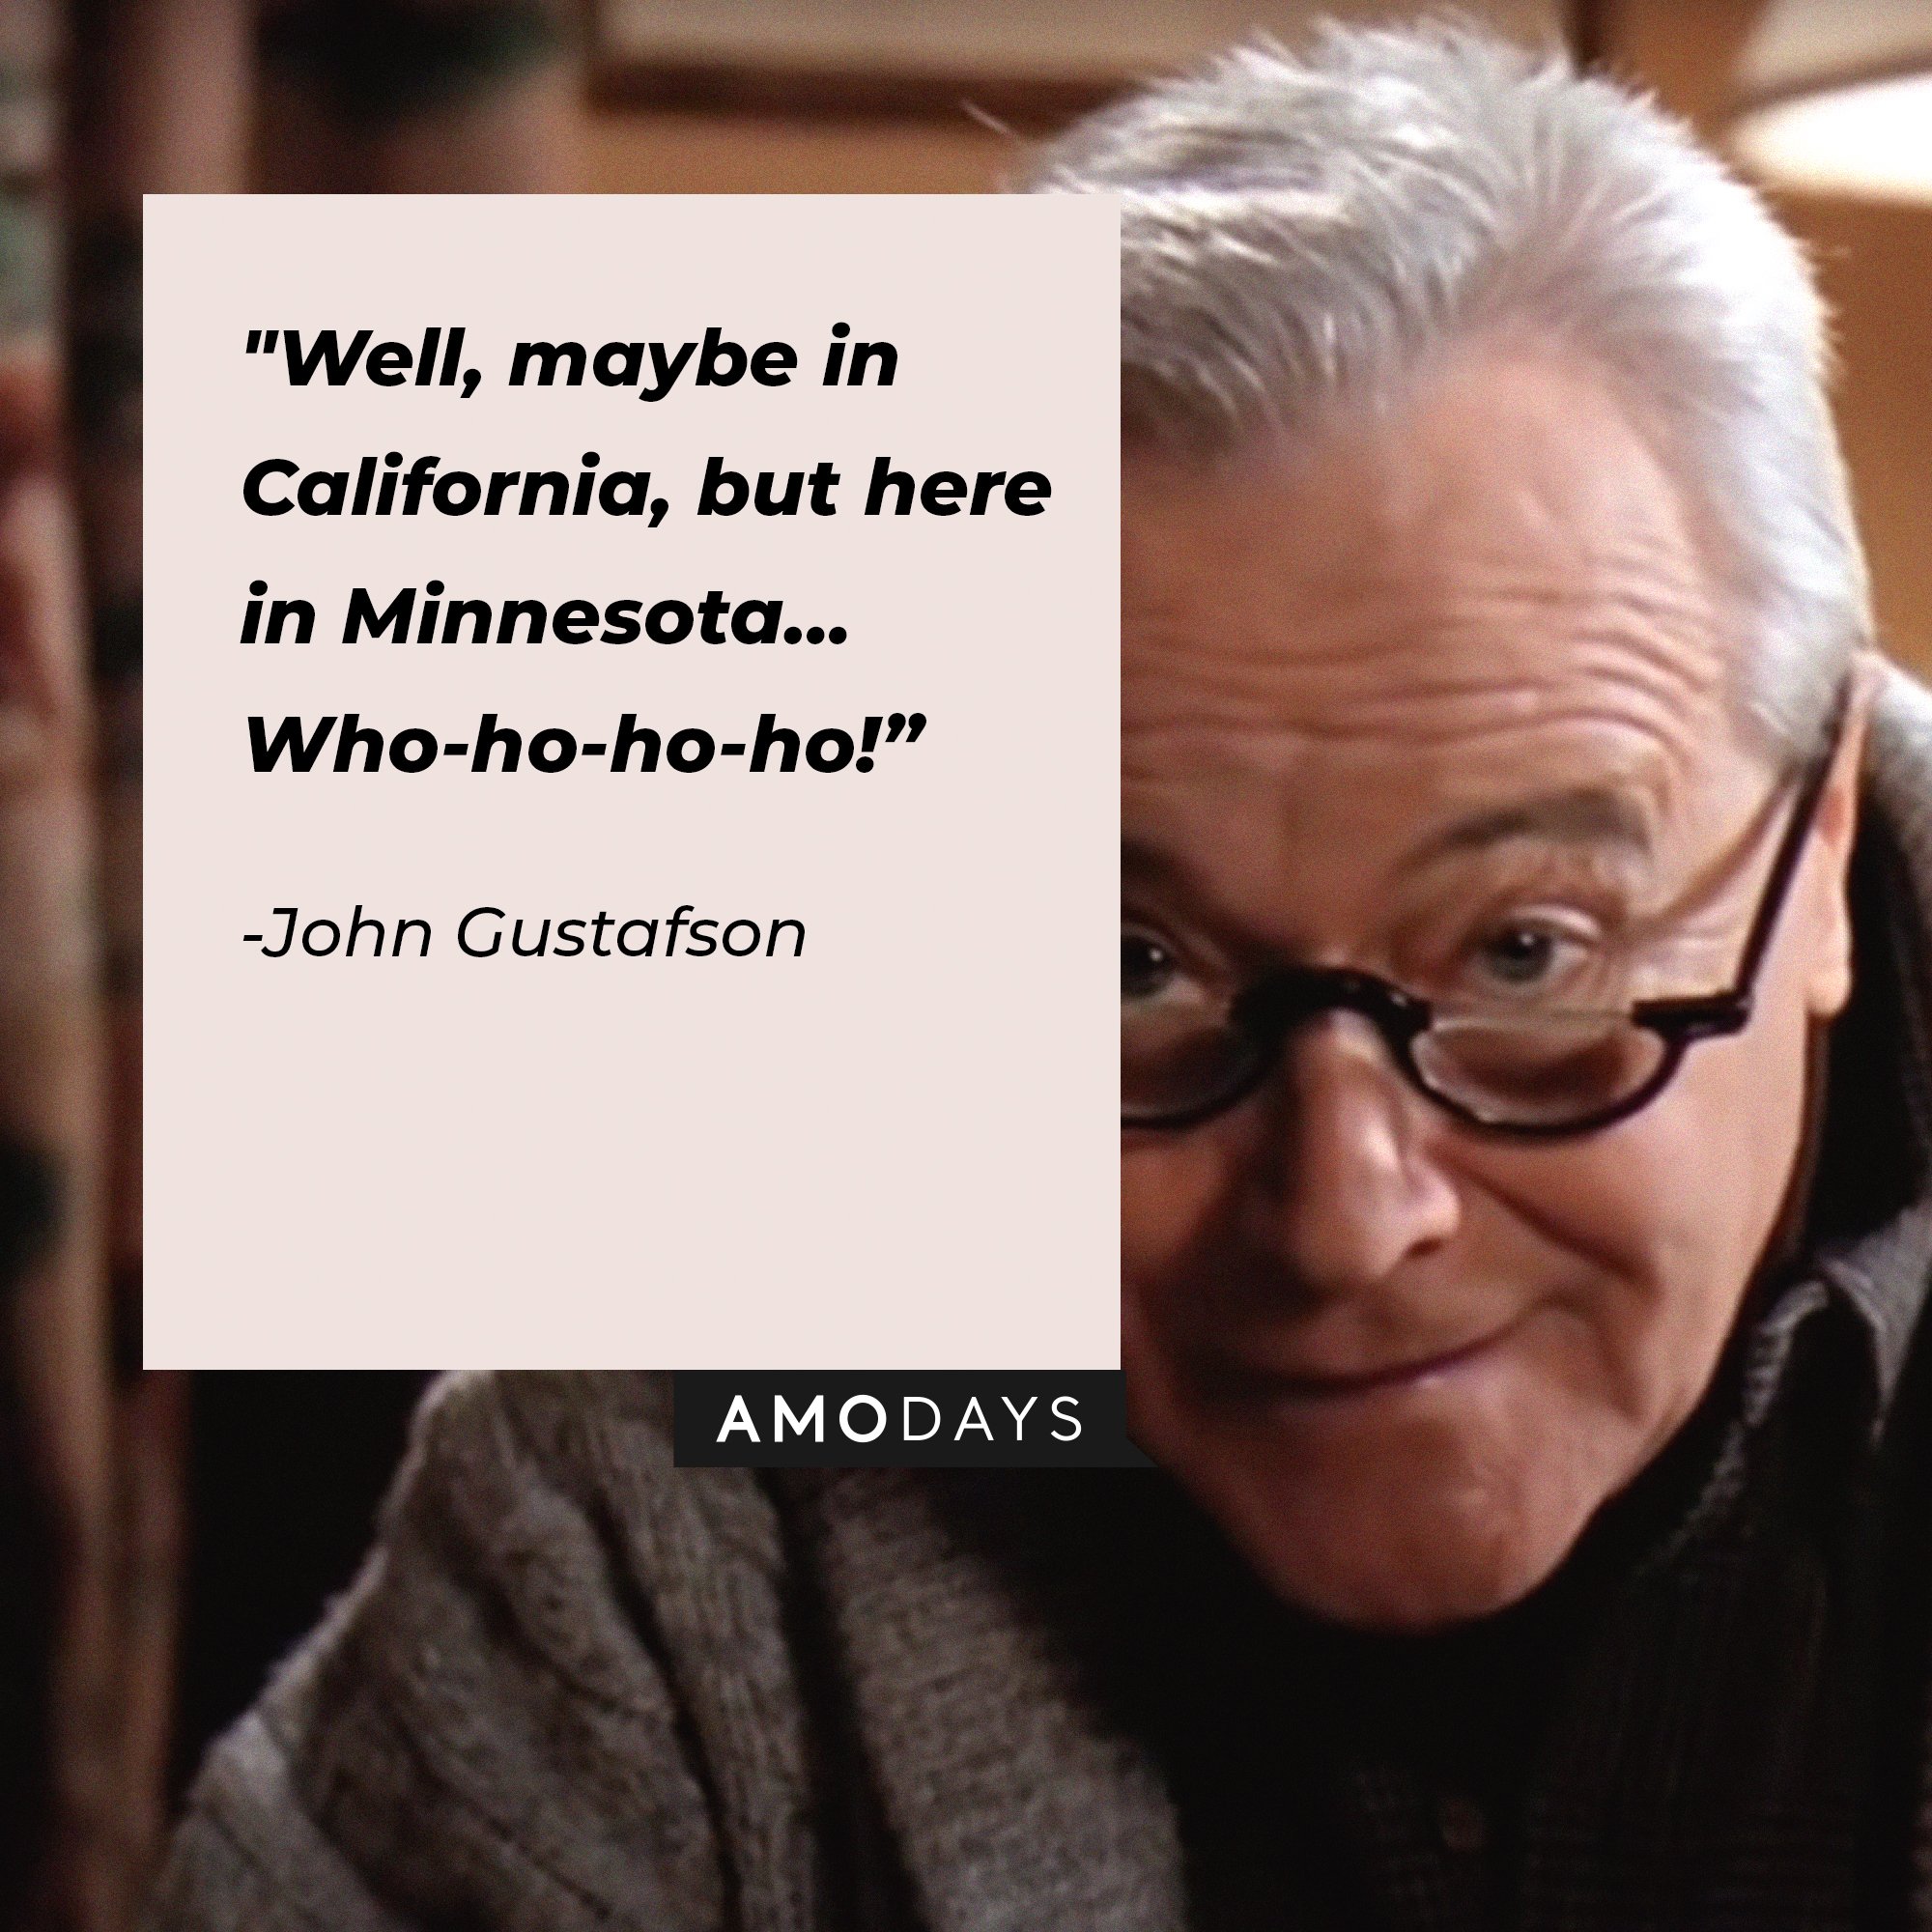  John Gustafson’s quote: "Well, maybe in California, but here in Minnesota… Who-ho-ho-ho!” | Image: AmoDays